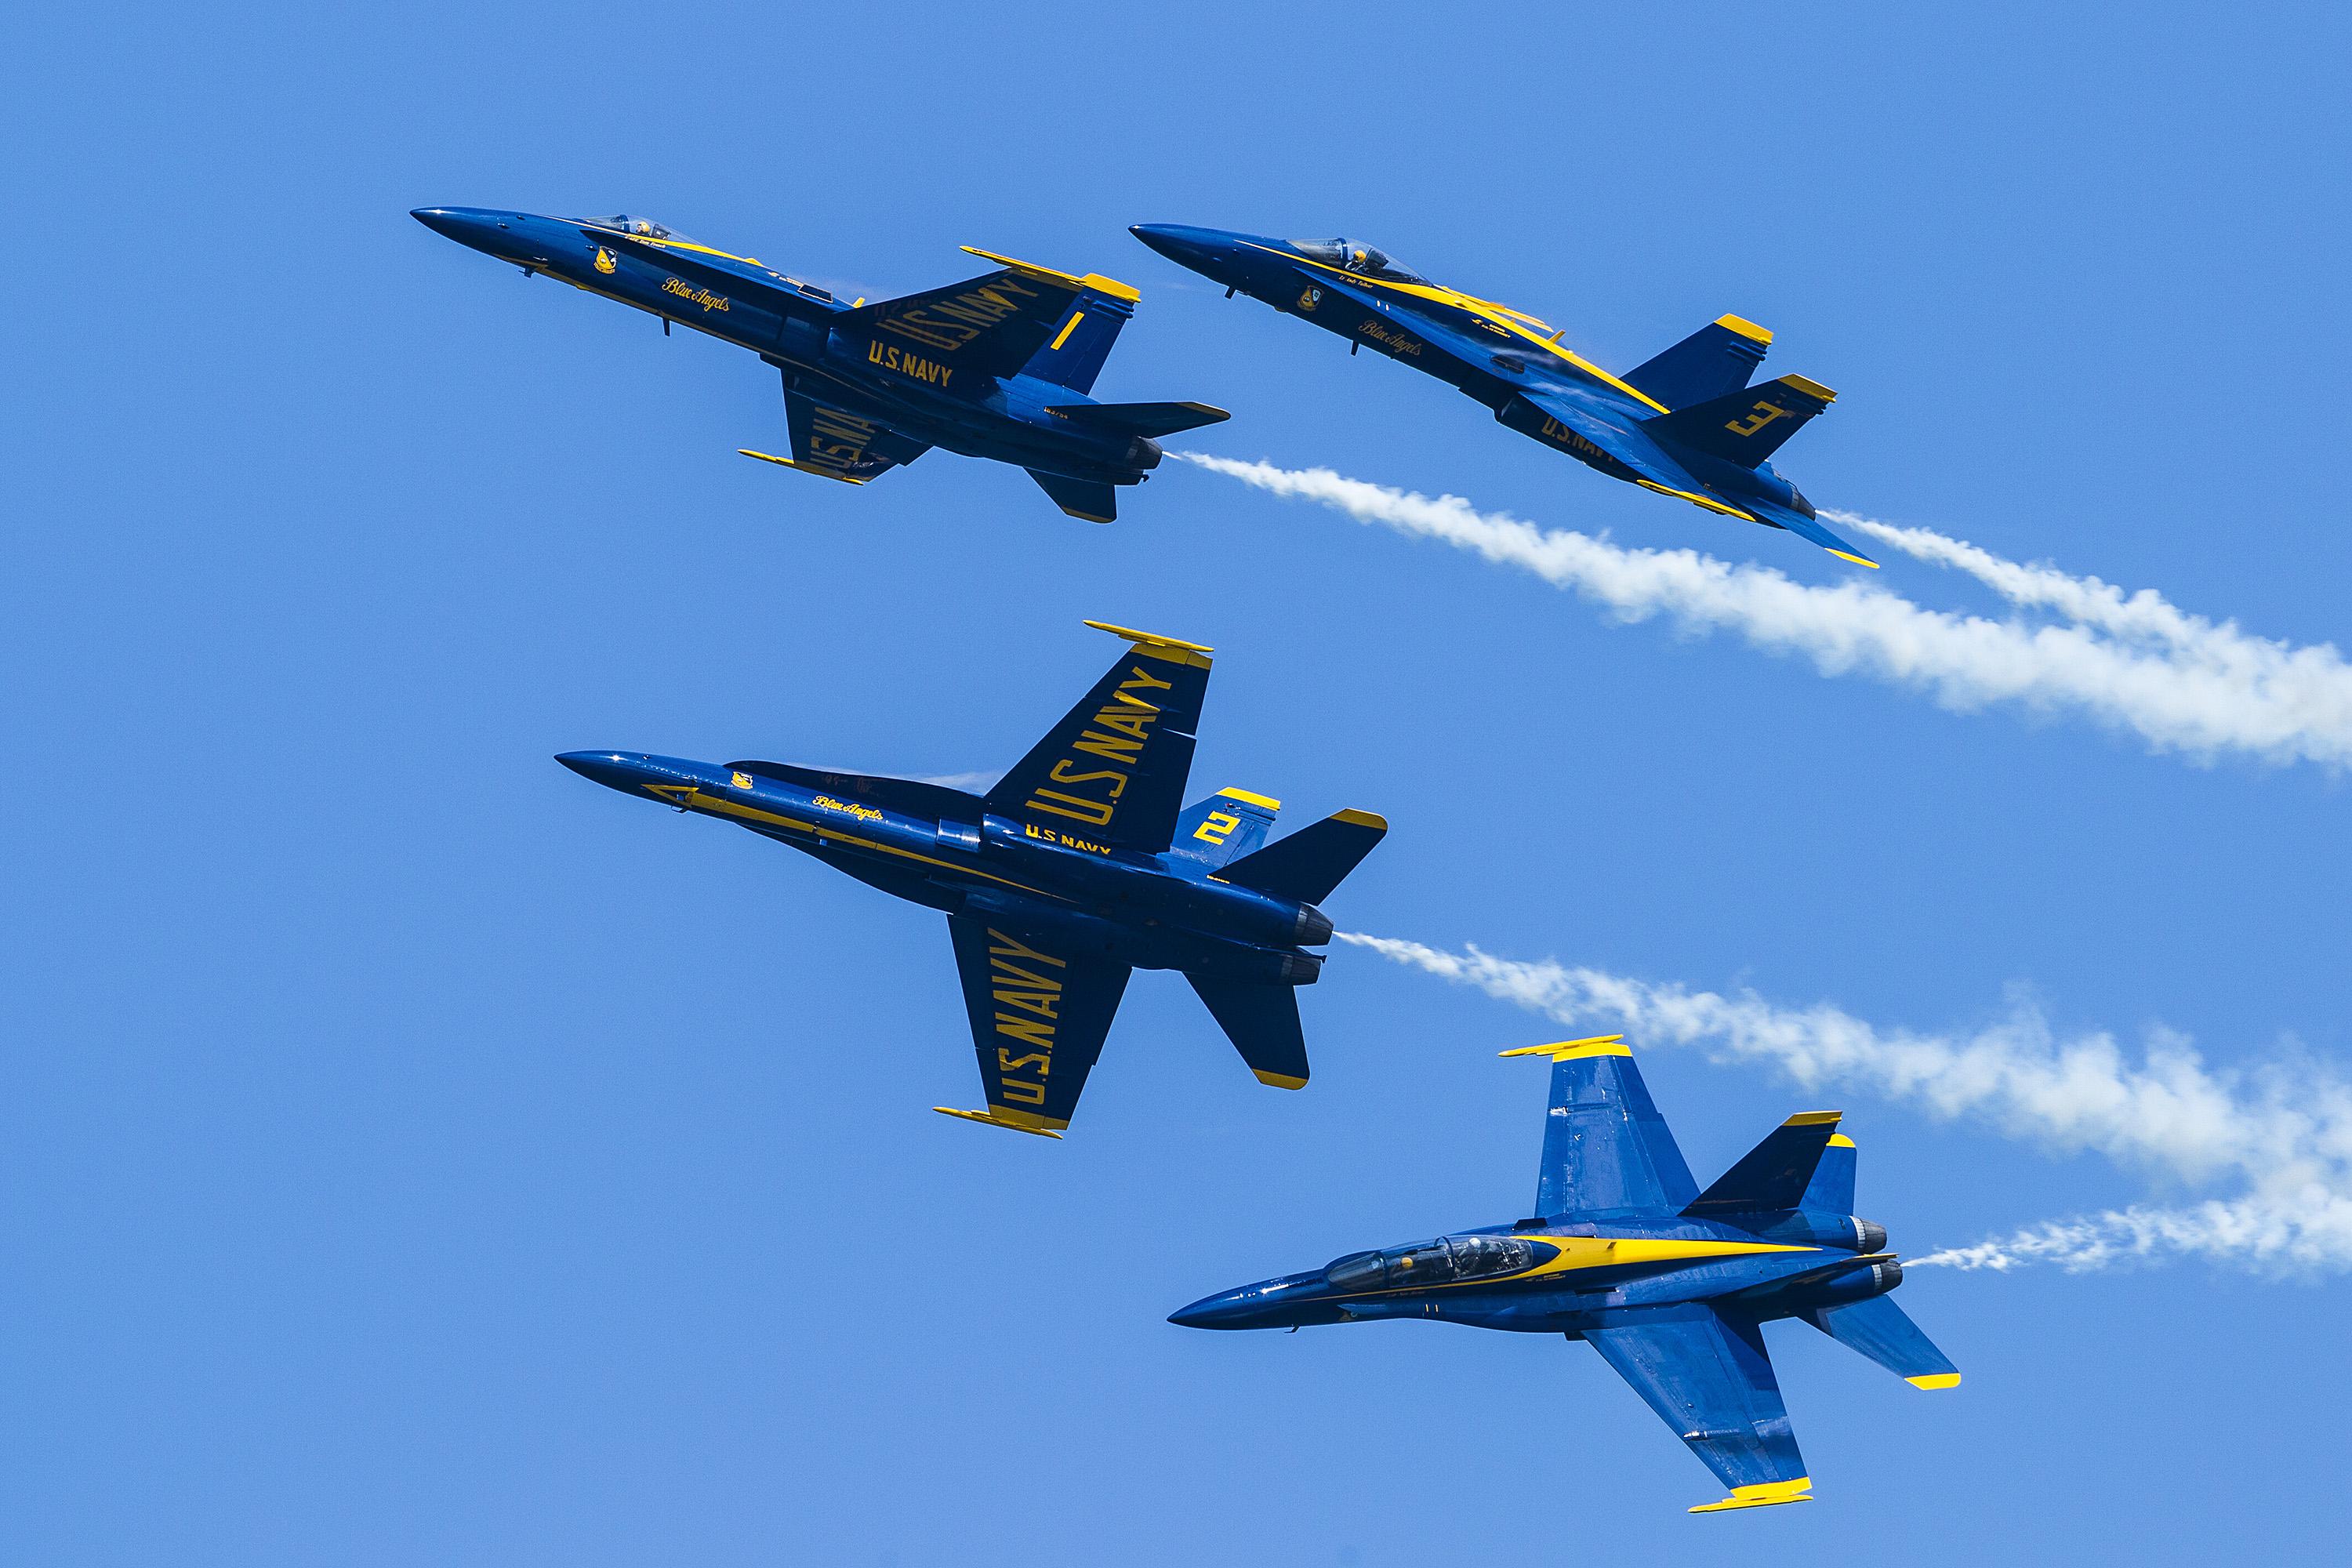 Chicago Air and Water Show 2015 (Scott L / Flickr)